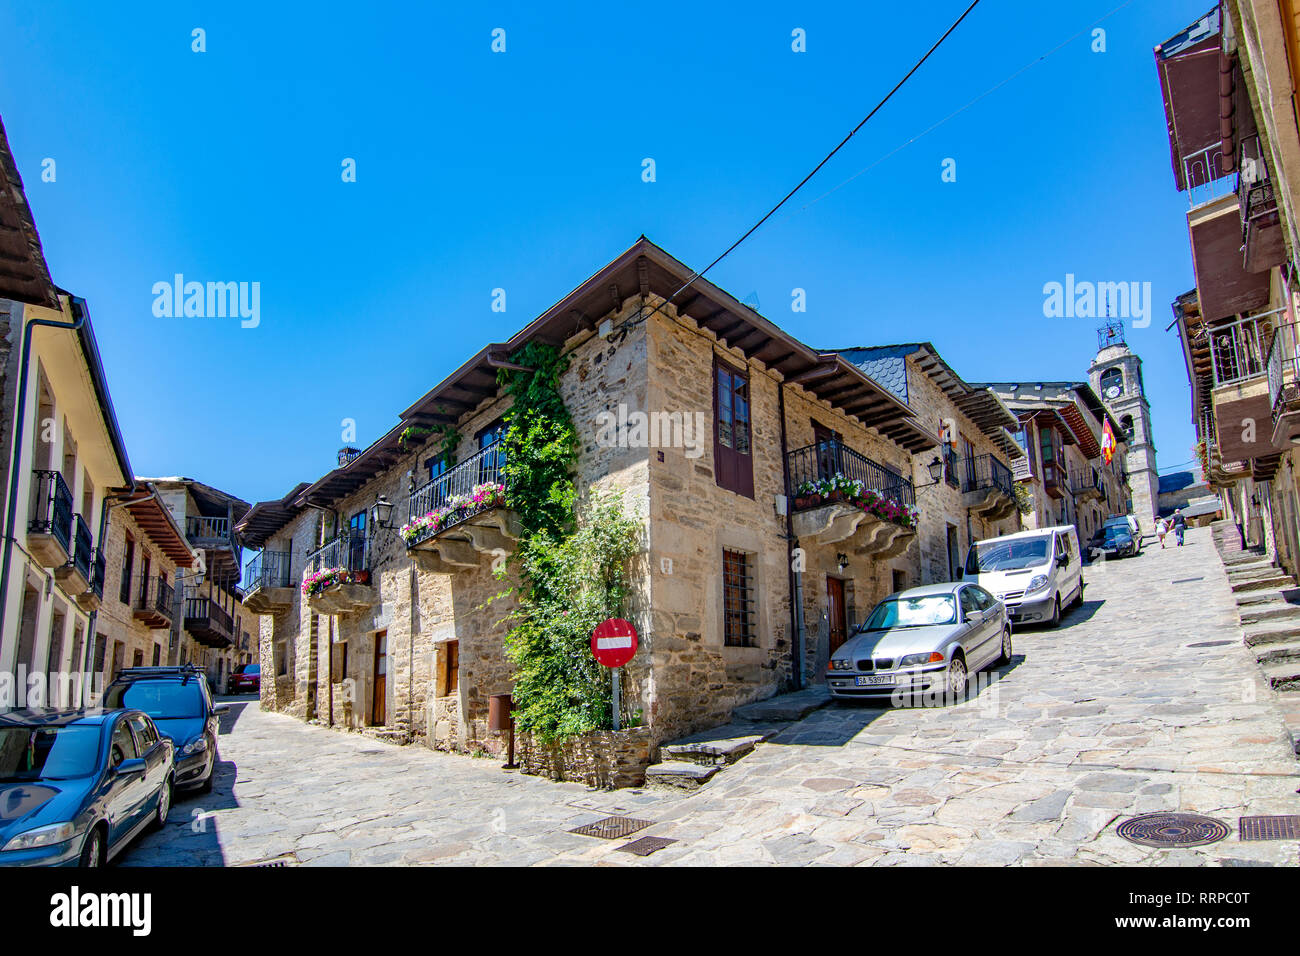 Puebla de Sanabria, Zamora, Spain, June 2017: view of a street and buildings of the medieval village of Puebla de Sanabria in the province of Zamora. Stock Photo